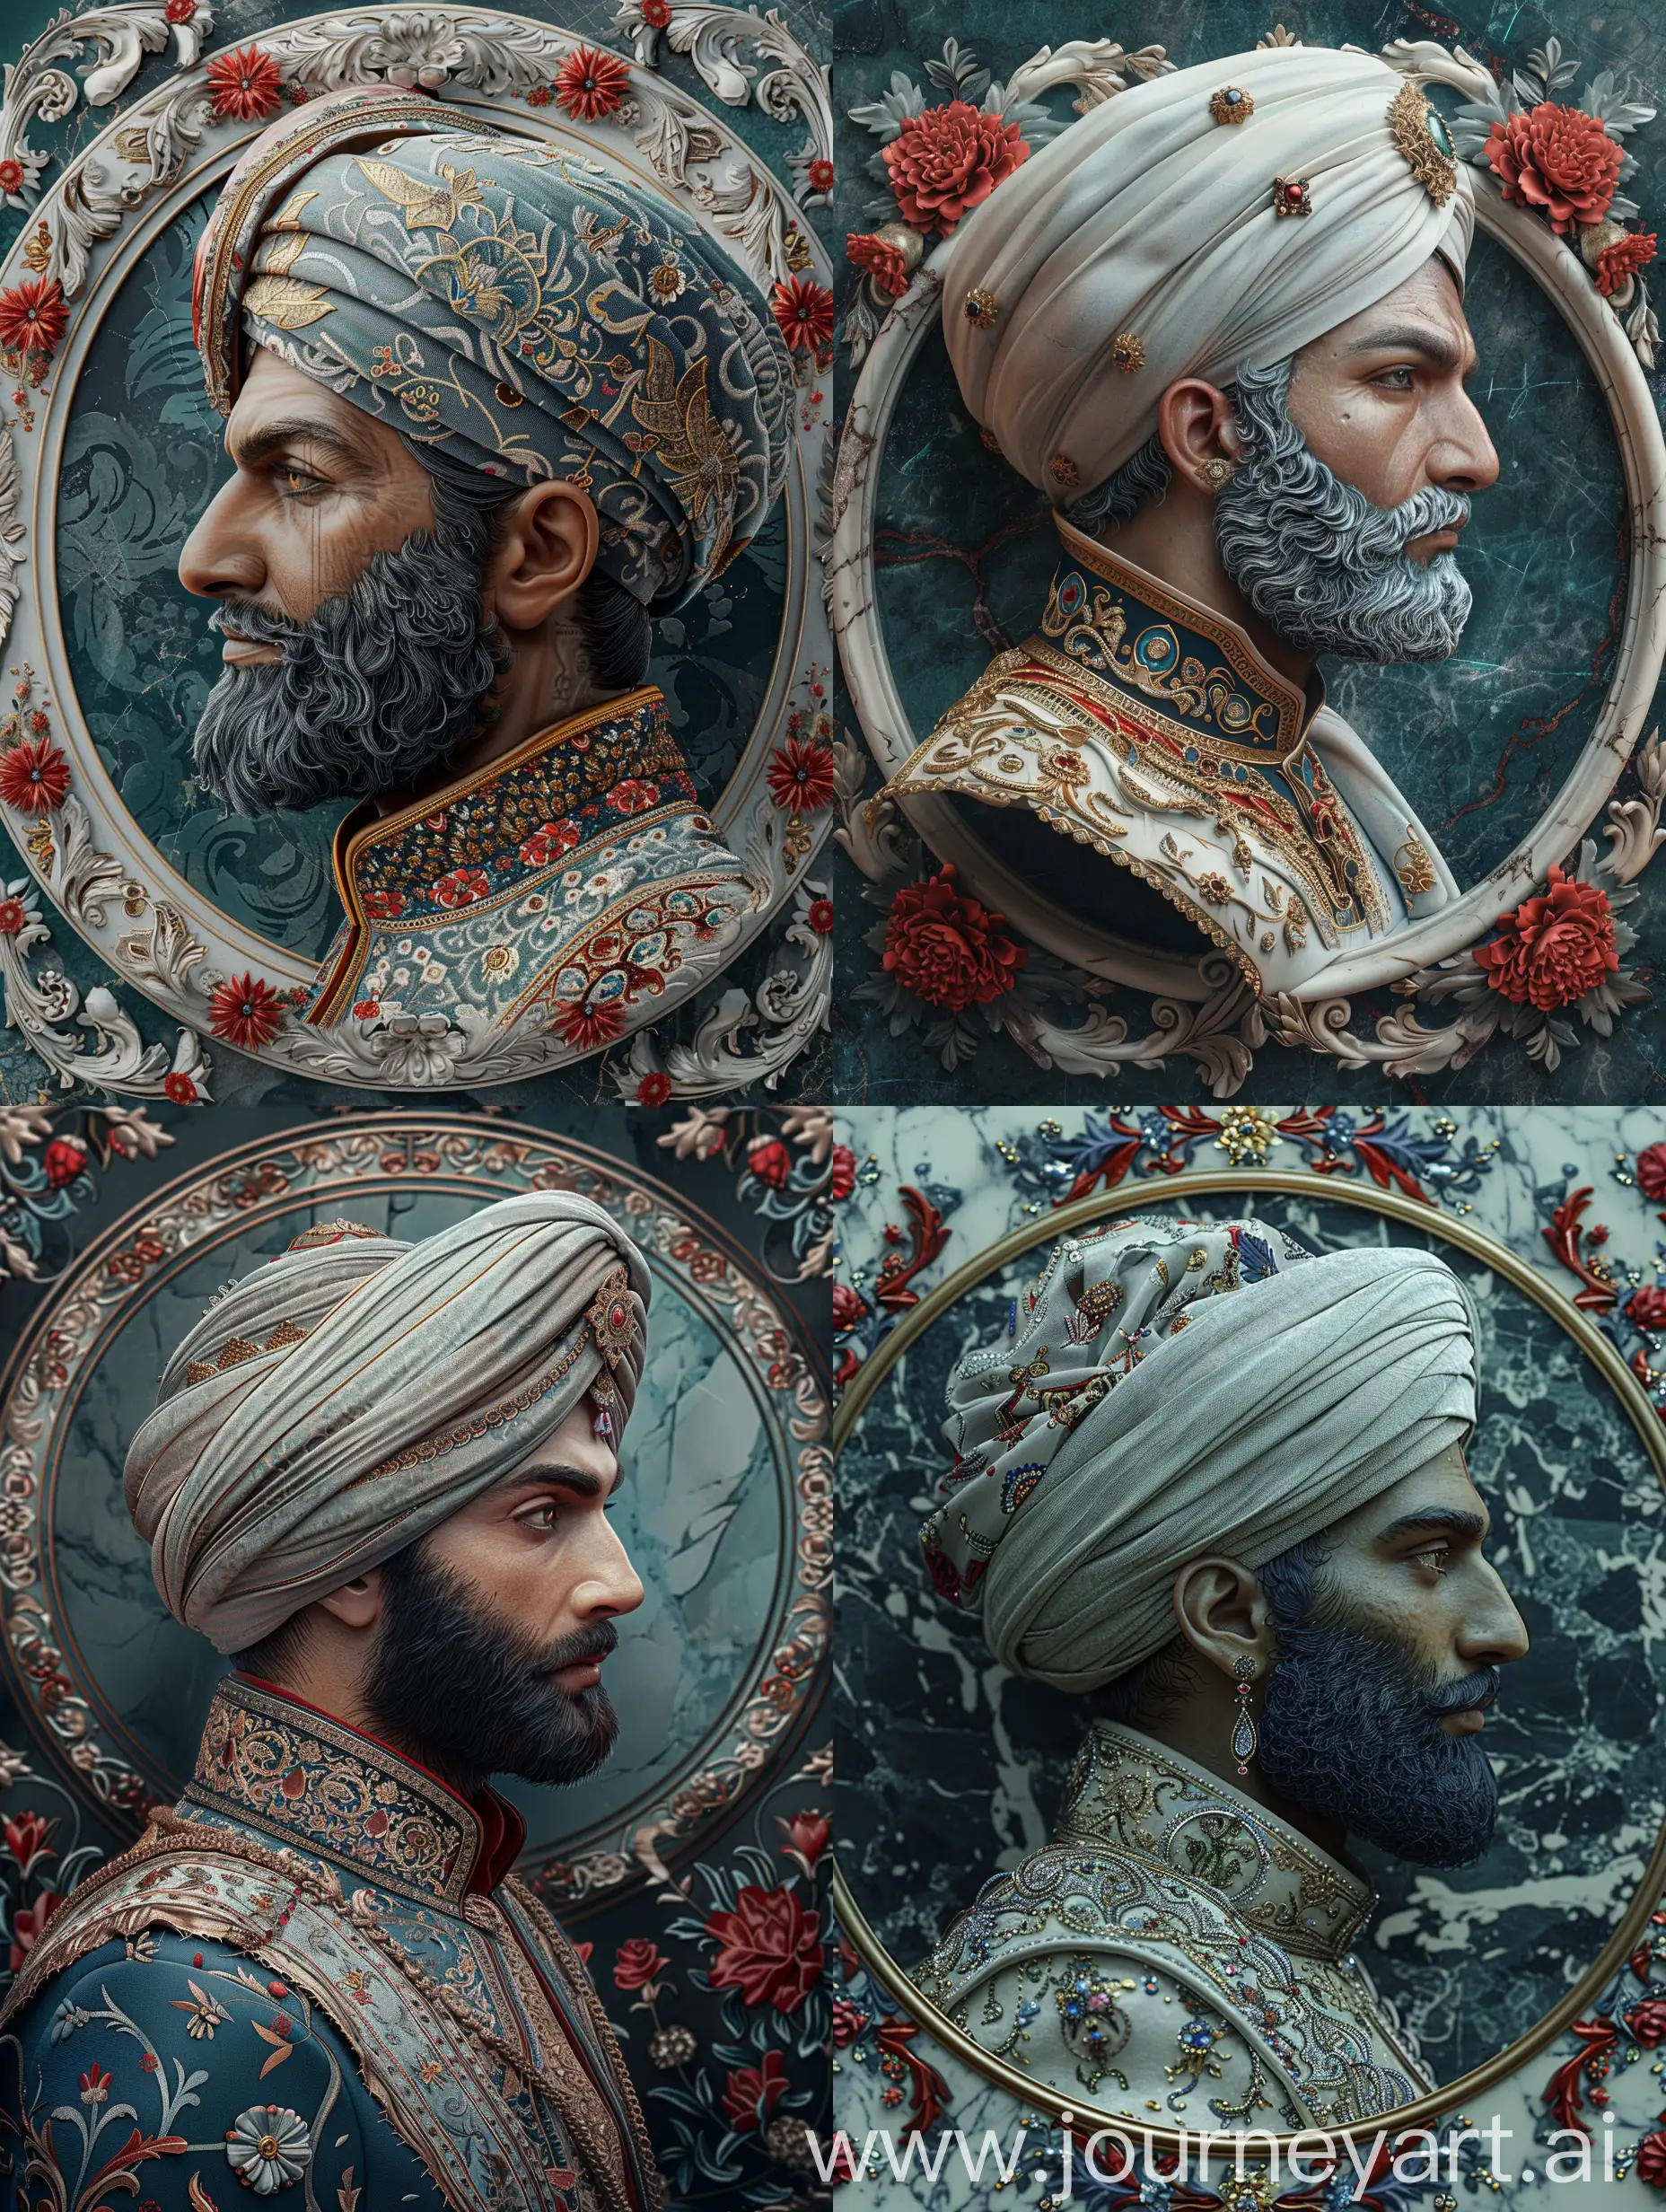 Isometric digital artwork of an Ottoman Sultan in profile view, carved in a marble relief style. The Sultan should have a neatly trimmed beard and wear an intricately detailed turban with gold and jewel accents. His attire should include rich patterns and ornate embroidery. Surround the Sultan's profile with a circular frame featuring detailed floral motifs in red, white, and blue with gold accents, all appearing to be carved from marble. Ensure the textures and contours mimic the smooth, polished, resin-coated effect of marble carving, with fine details and a dark marble background for contrast. The Sultan's face should be very smooth, enhancing the polished and refined look. The overall style should blend hyper-realism with the aesthetic of fine marble craftsmanship, Green blue hue composition --s 700 --ar 9:12